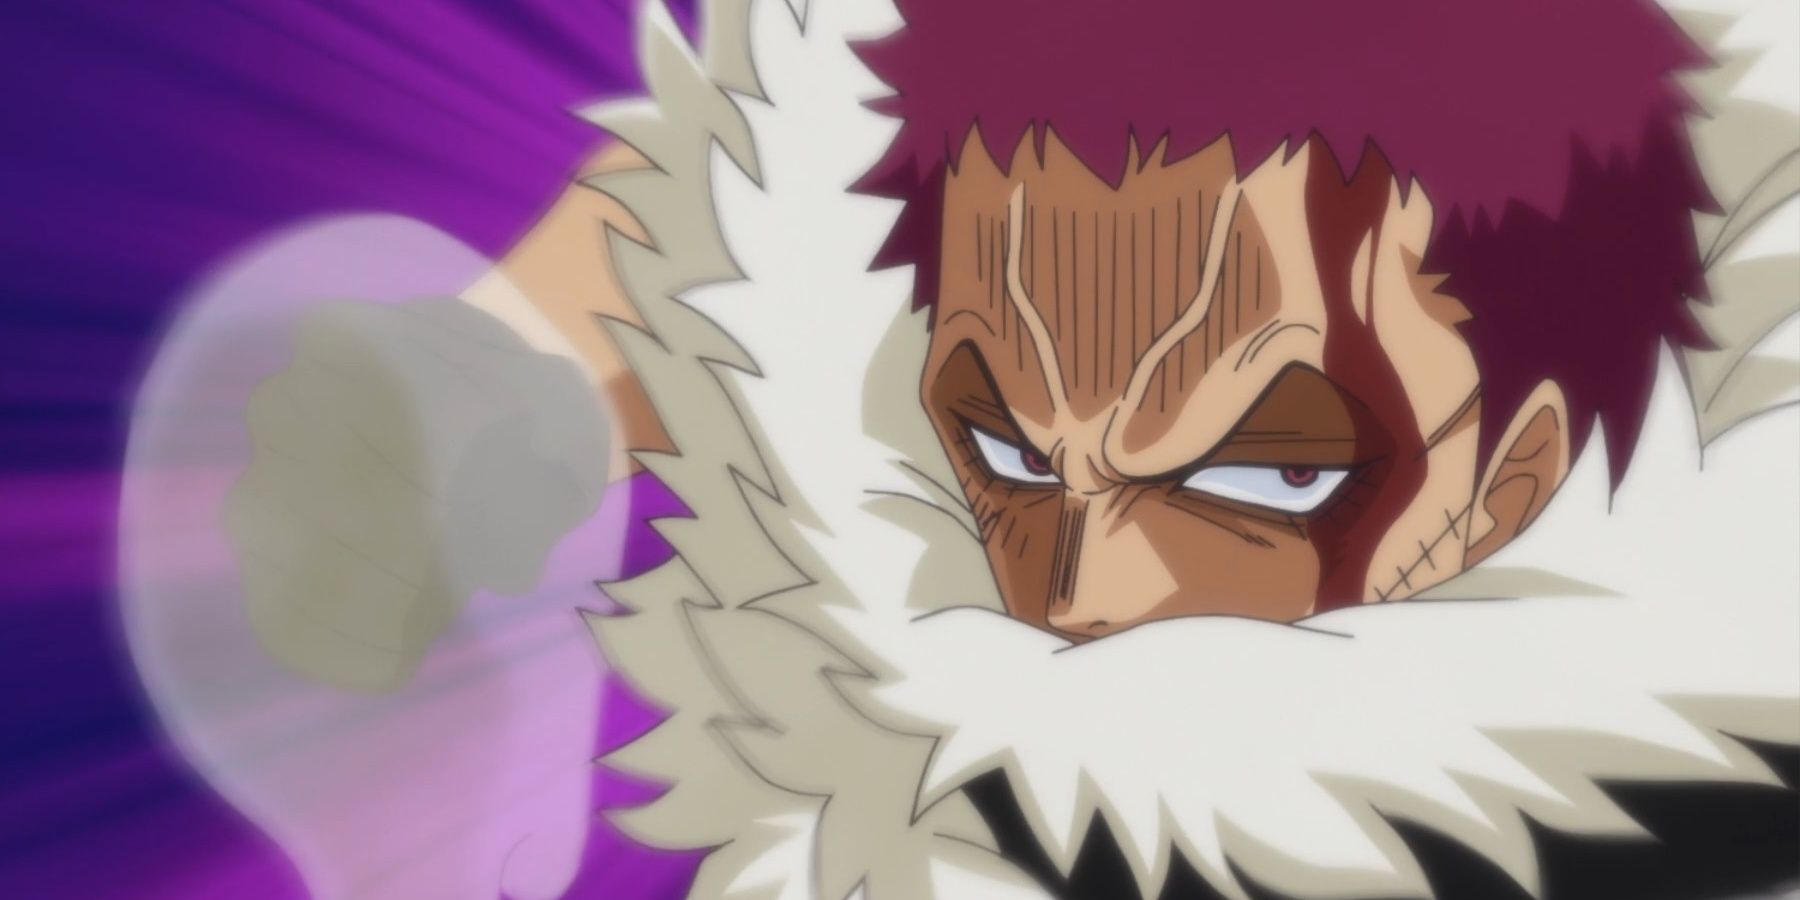 Charlotte Katakuri powers up to throw a punch in One Piece.